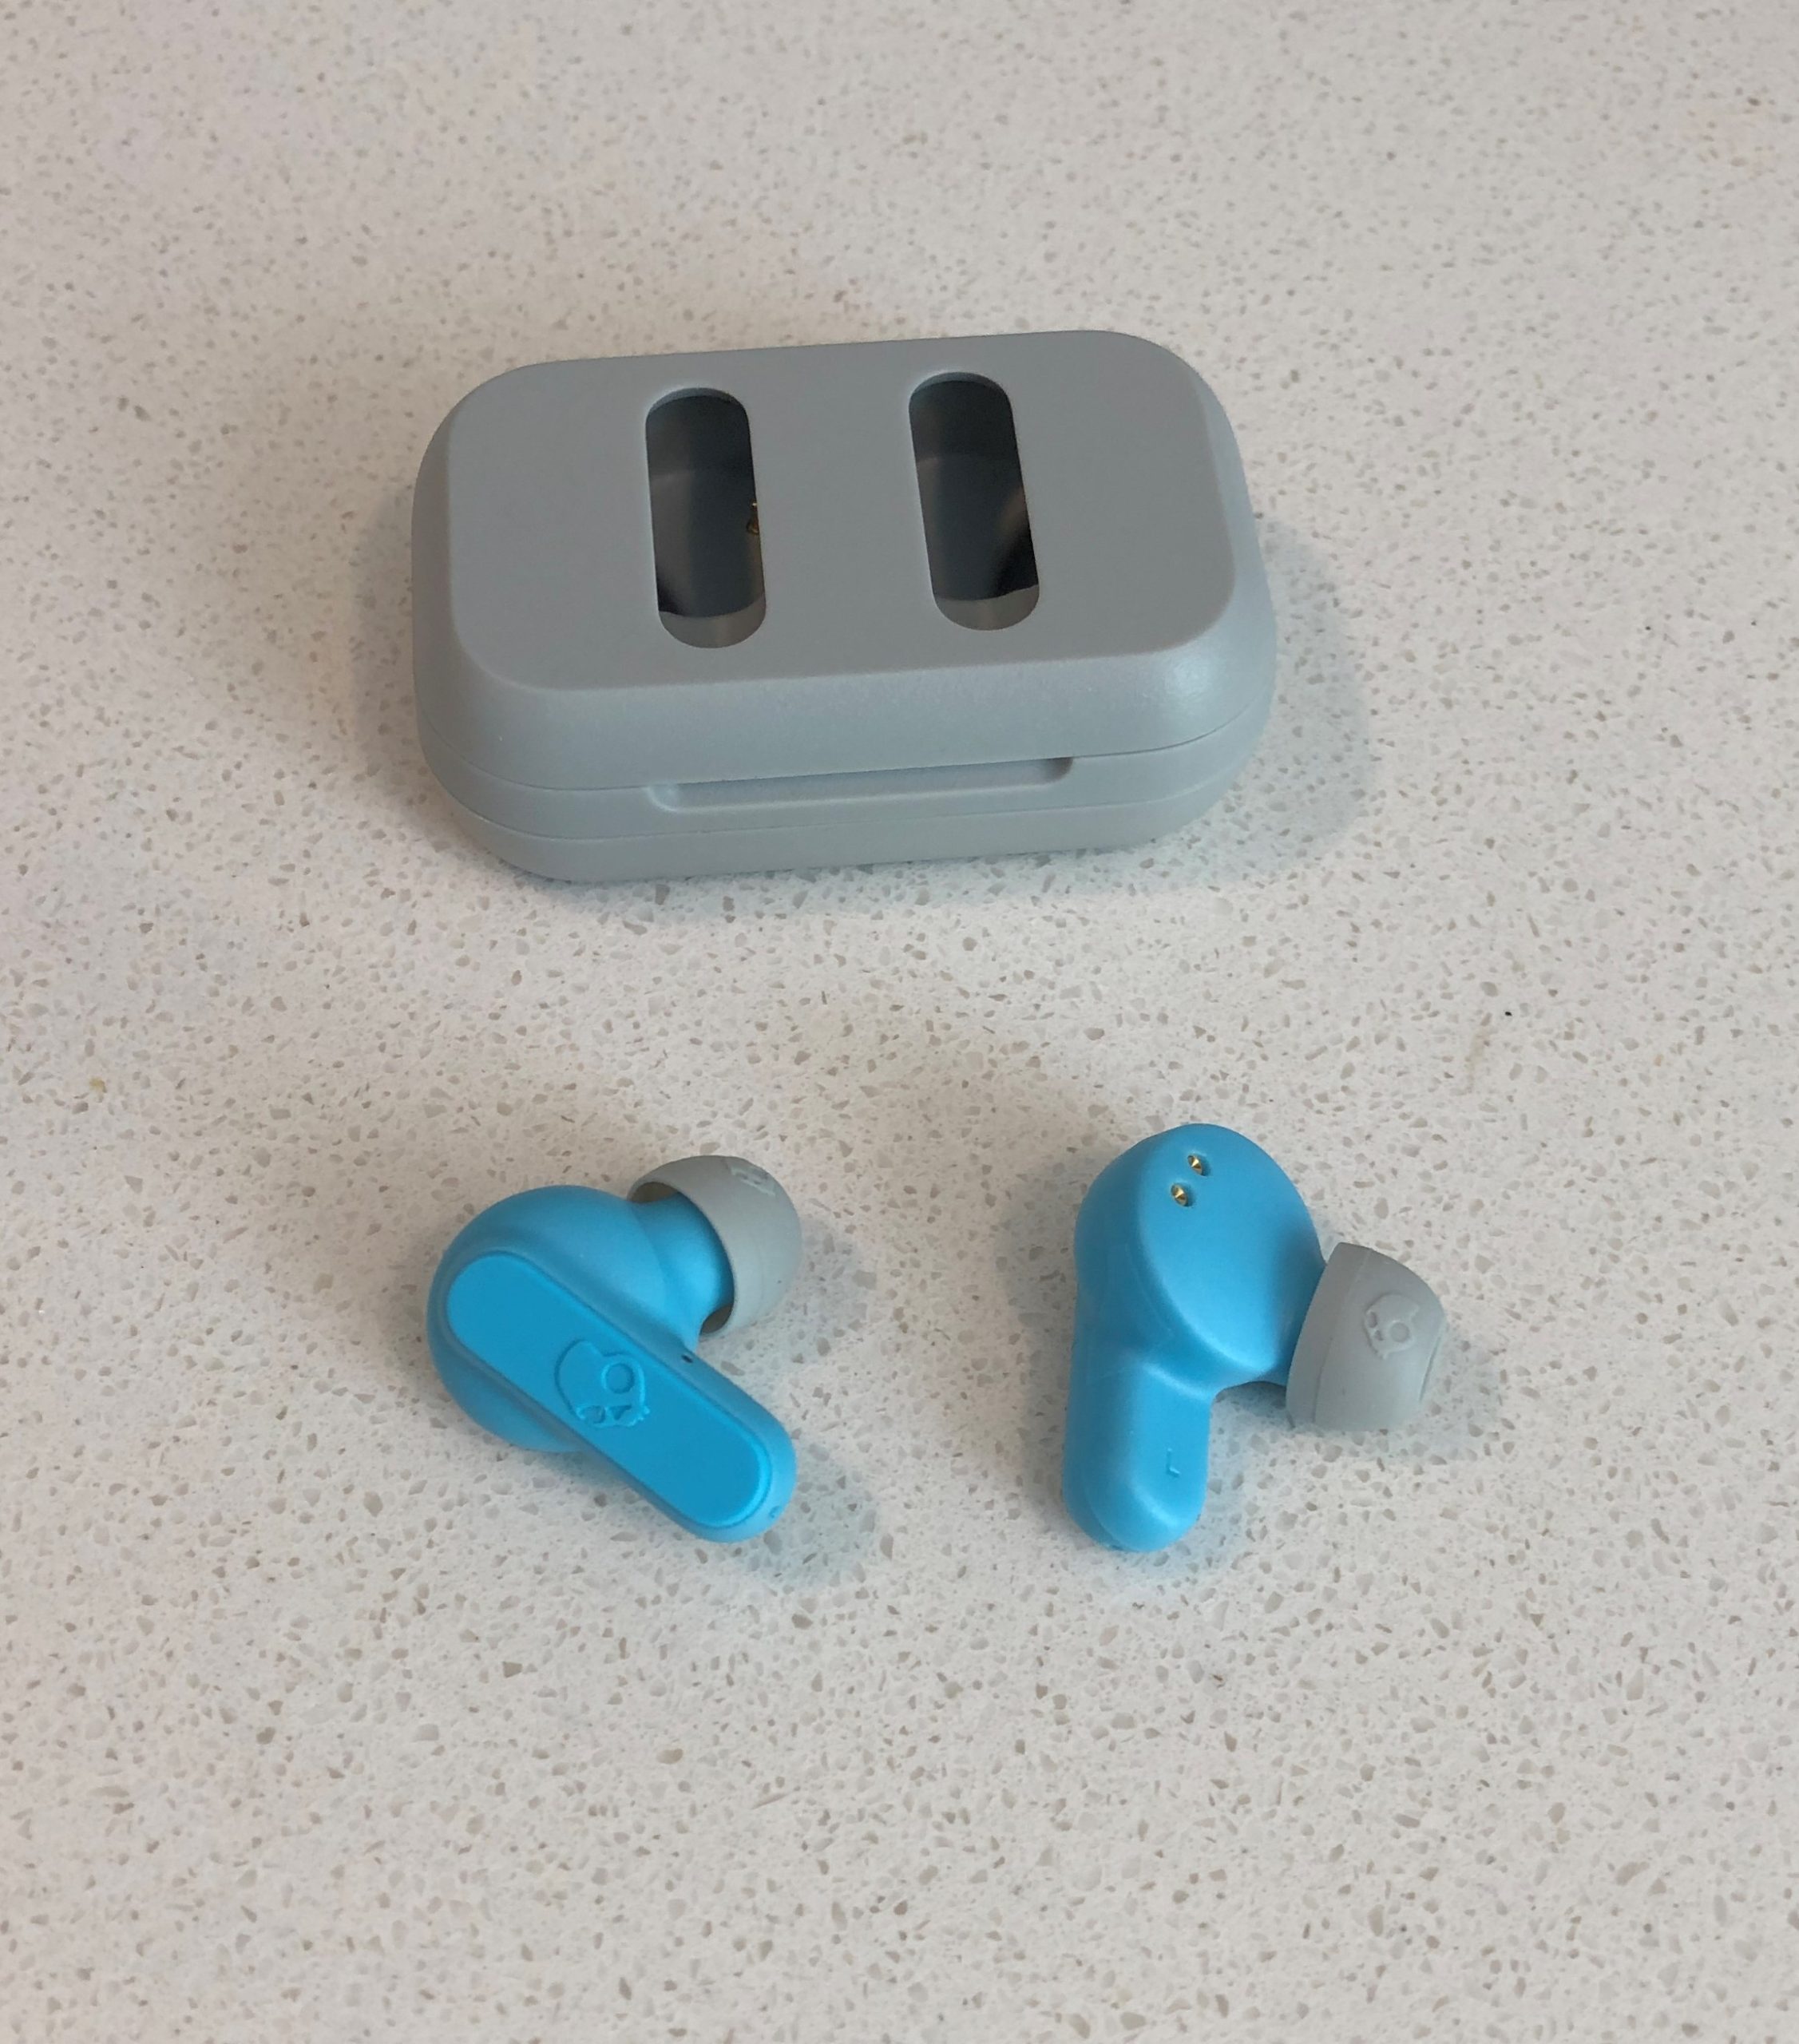 Skullcandy Dime 2 charging case and wireless earbuds